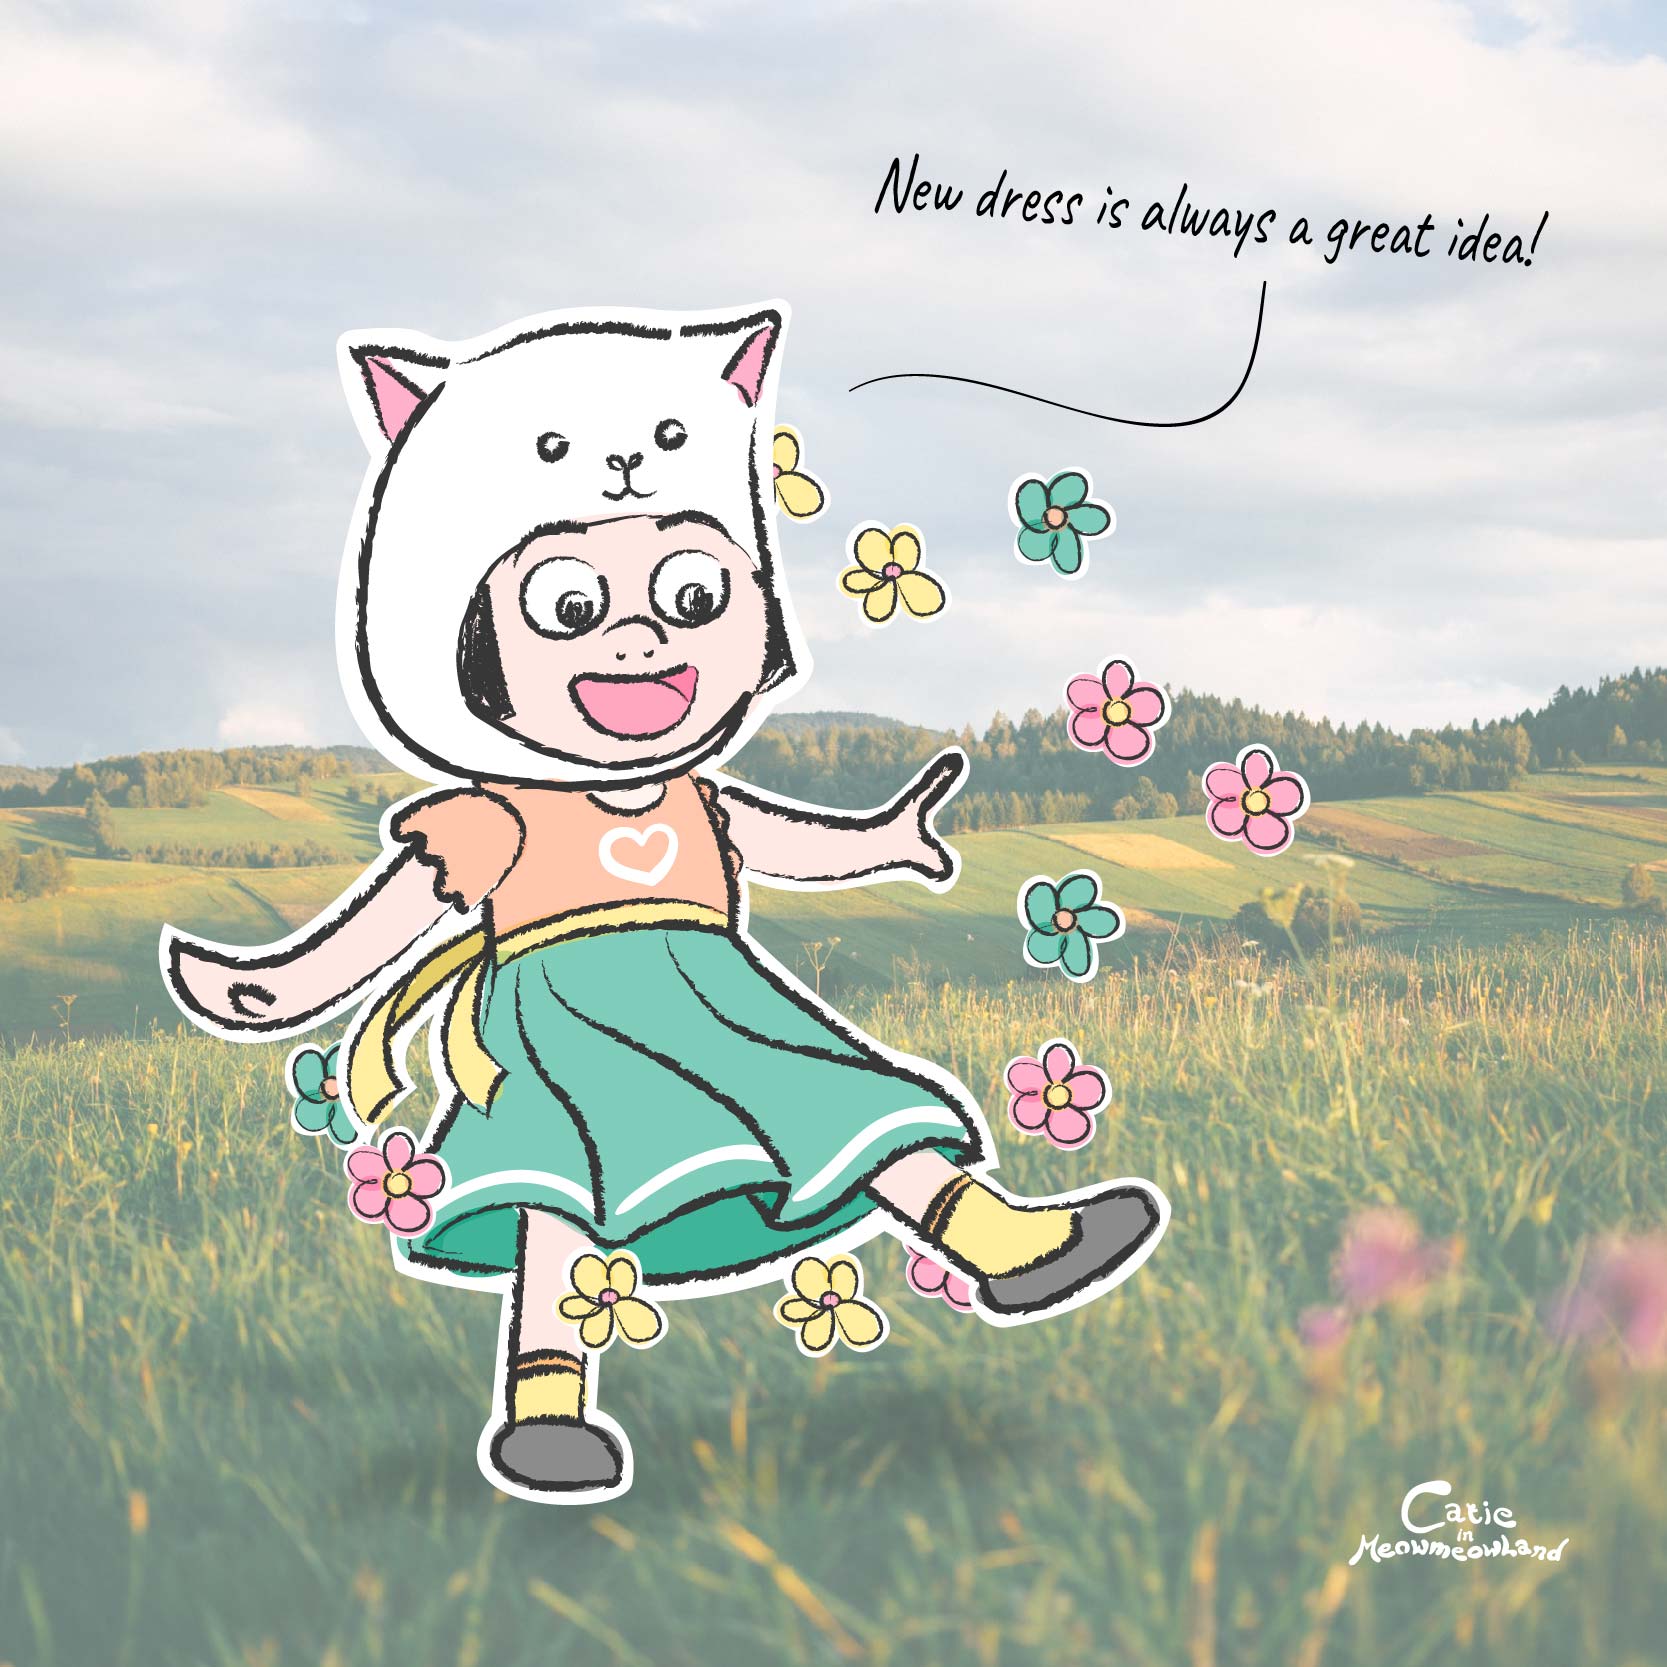 Catie in MeowmeowLand - Doodle illustration - New dress